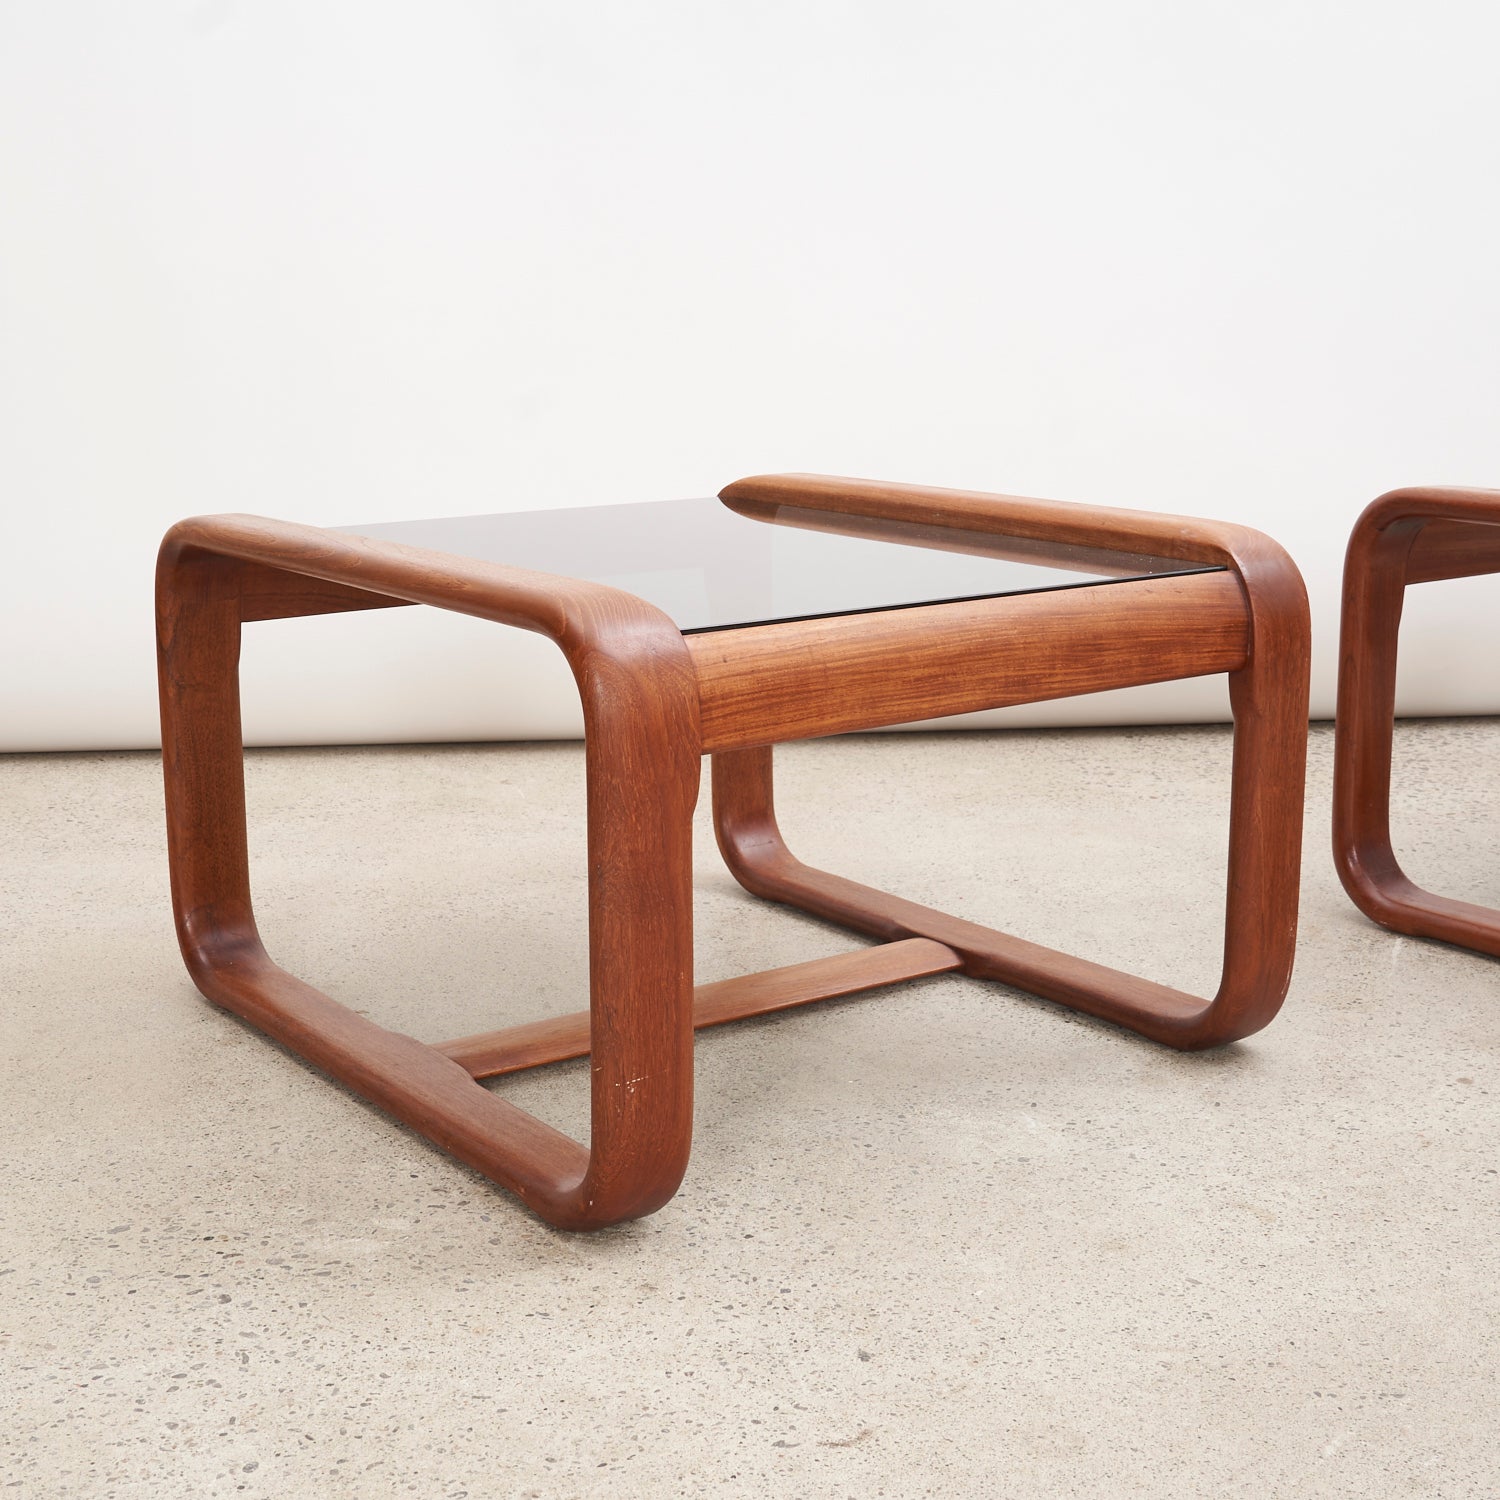 Pair of Teak & Smoked Glass Side Tables